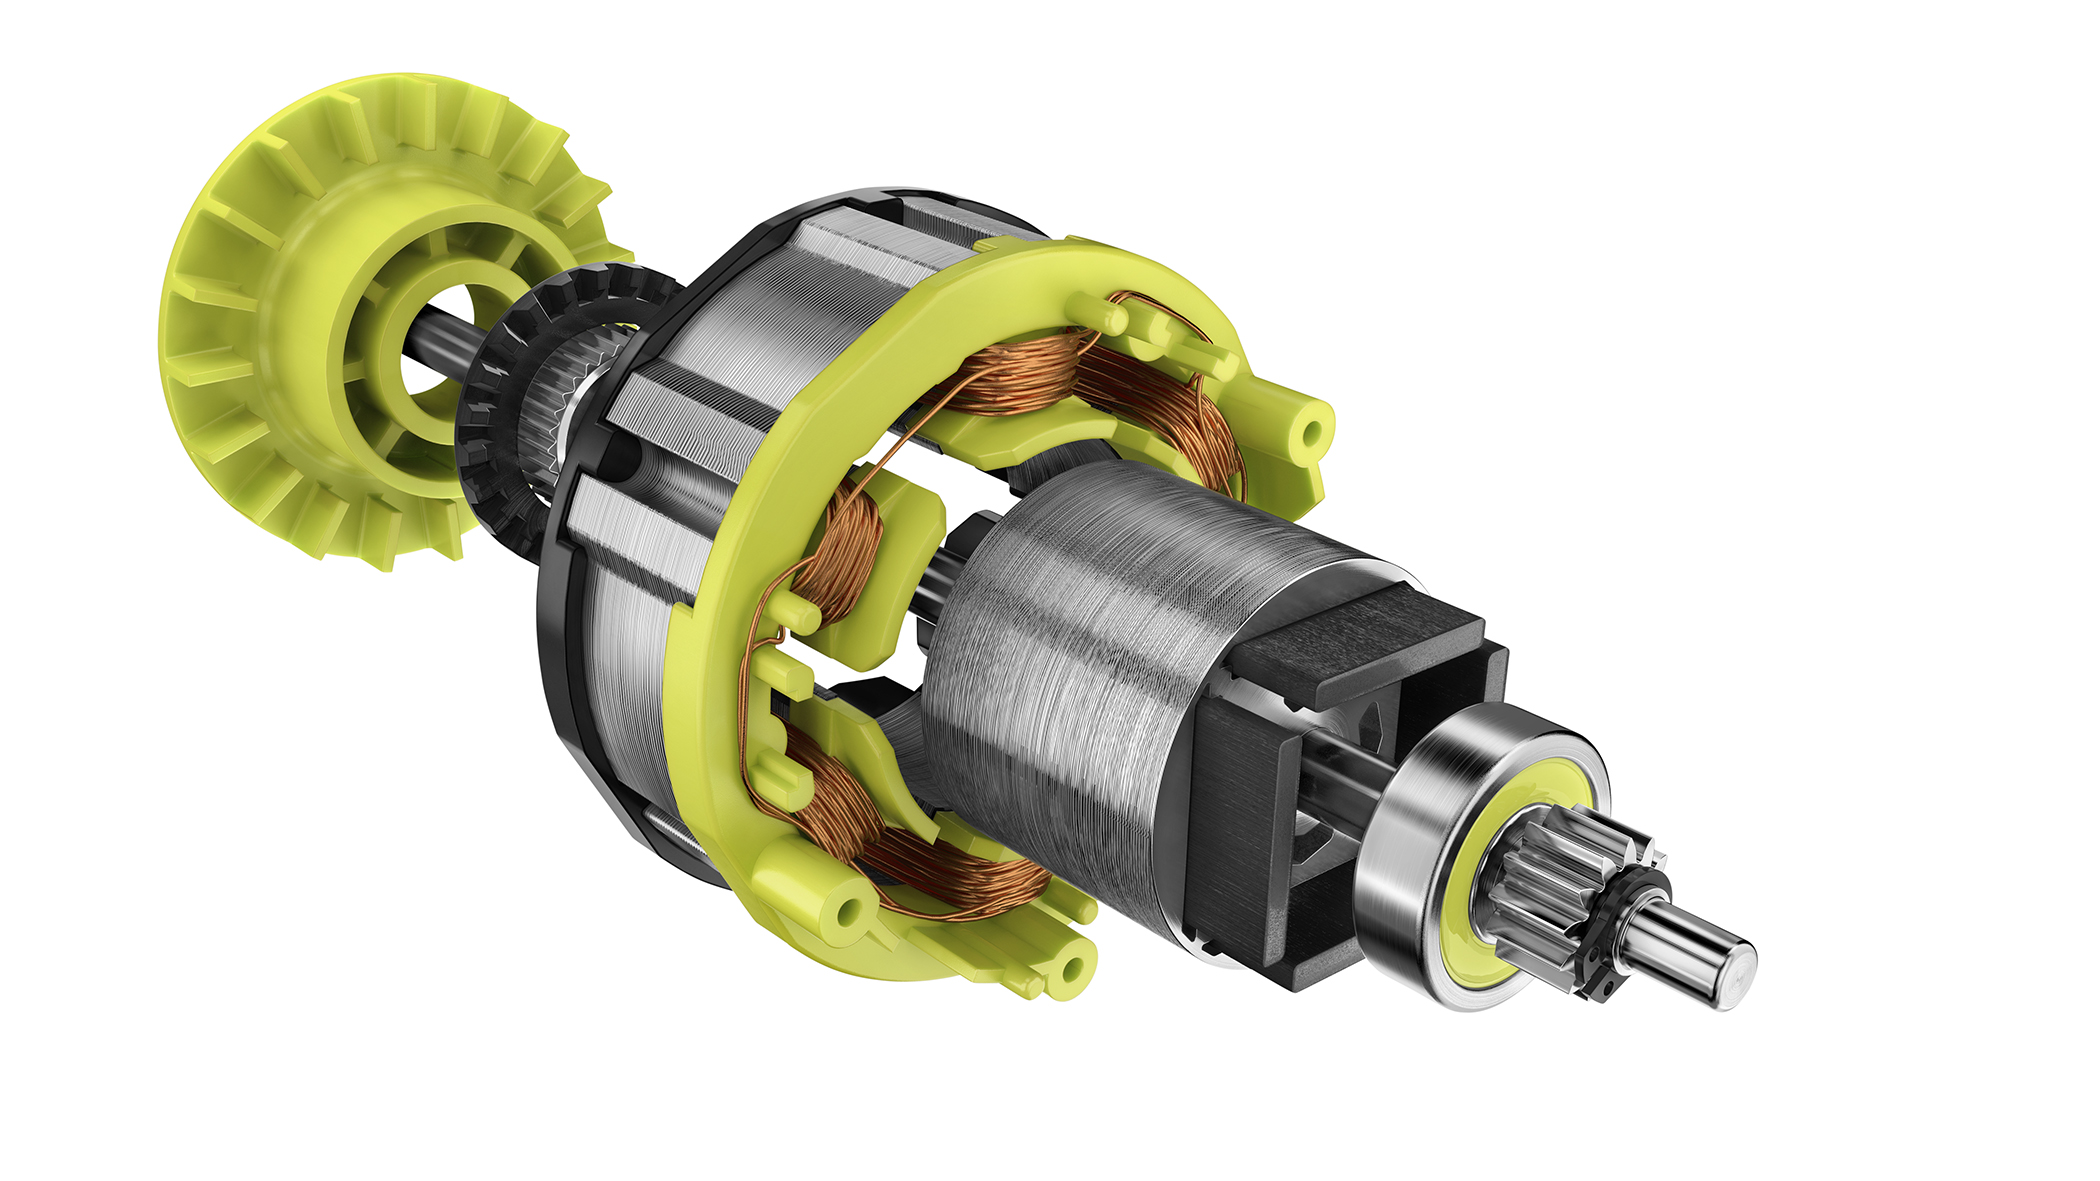 Up to 20% Faster Drilling and Up to 50% More Torque